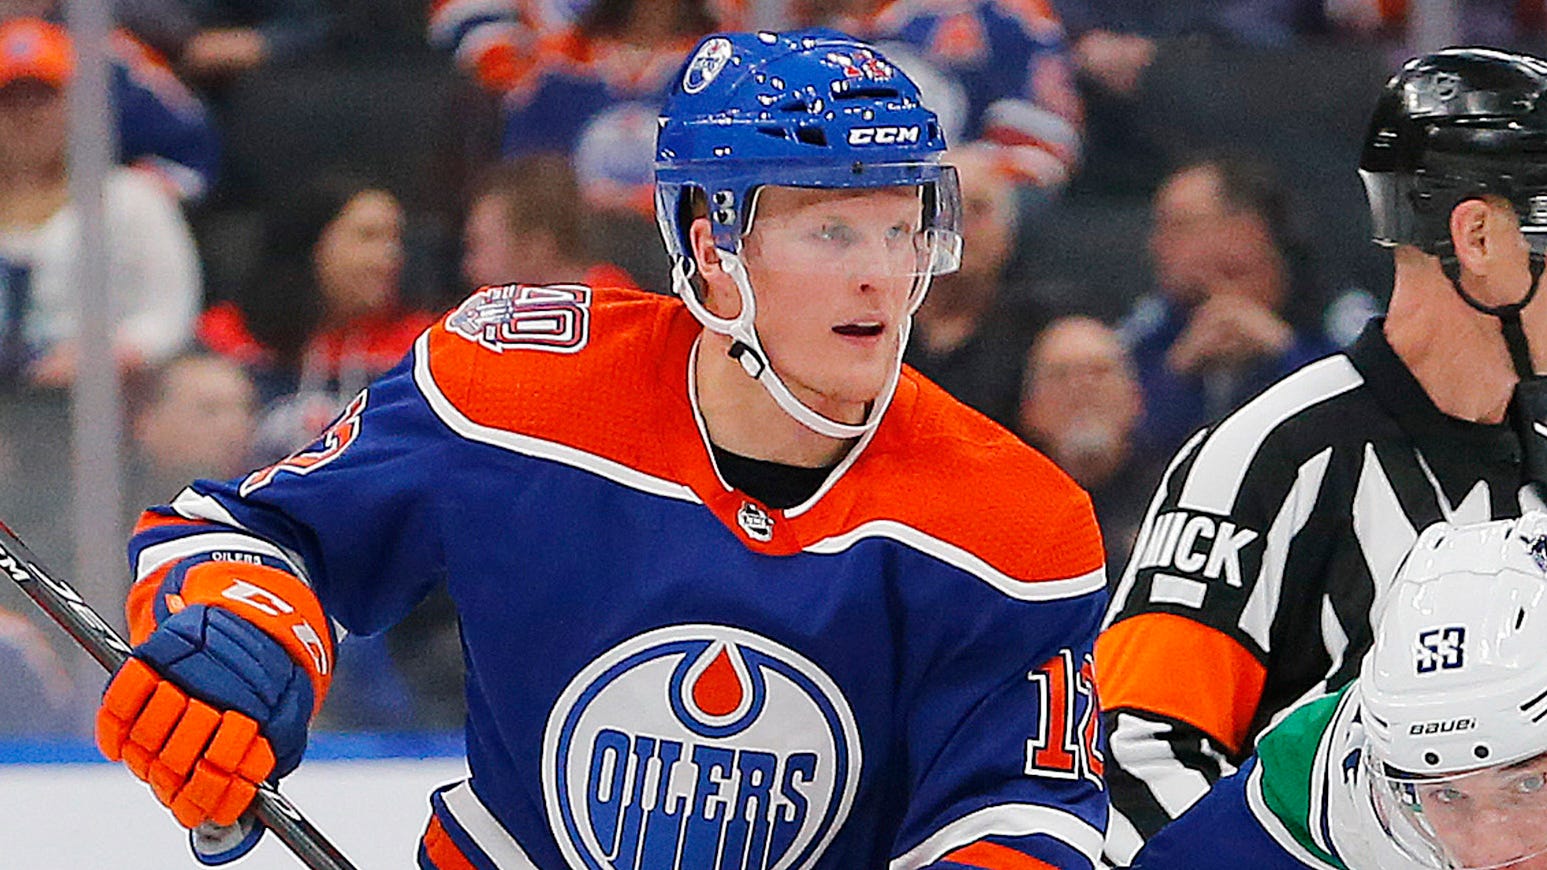 Colby Cave Oilers Forward Dies At Age 25 After Suffering Brain Bleed